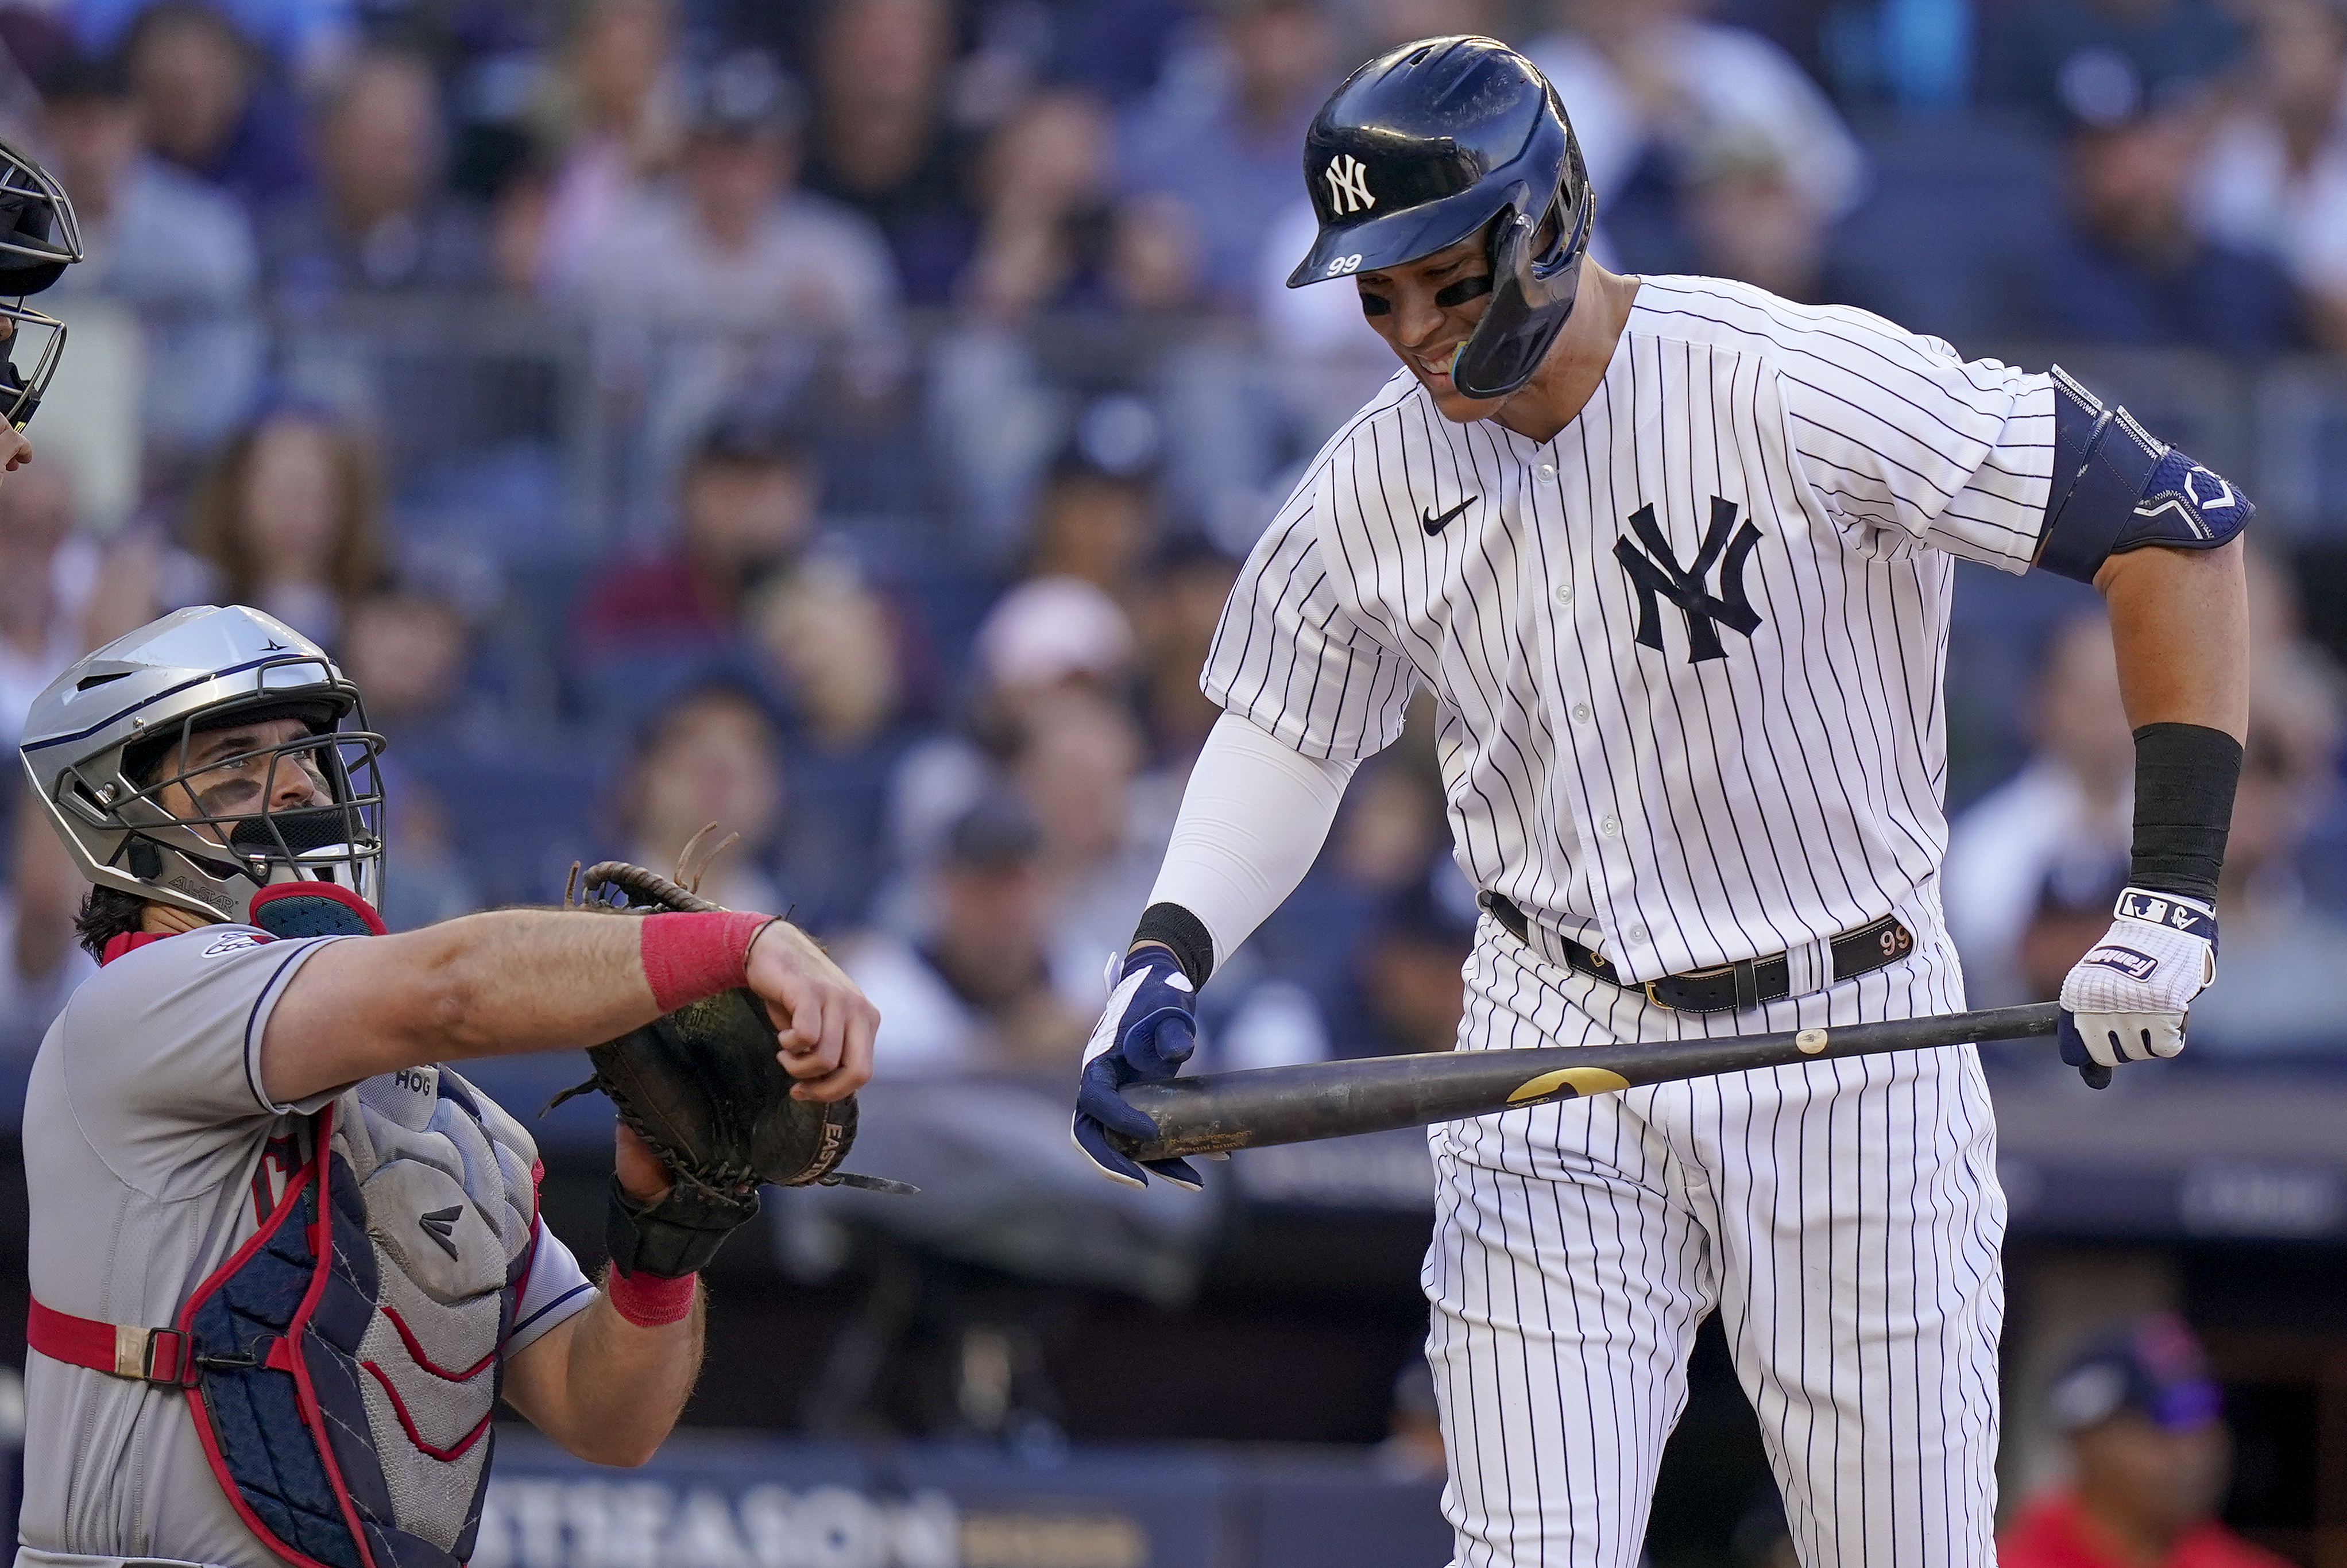 Lohud Yankees Blog: Is Ackley a bad player or simply in a bad role?